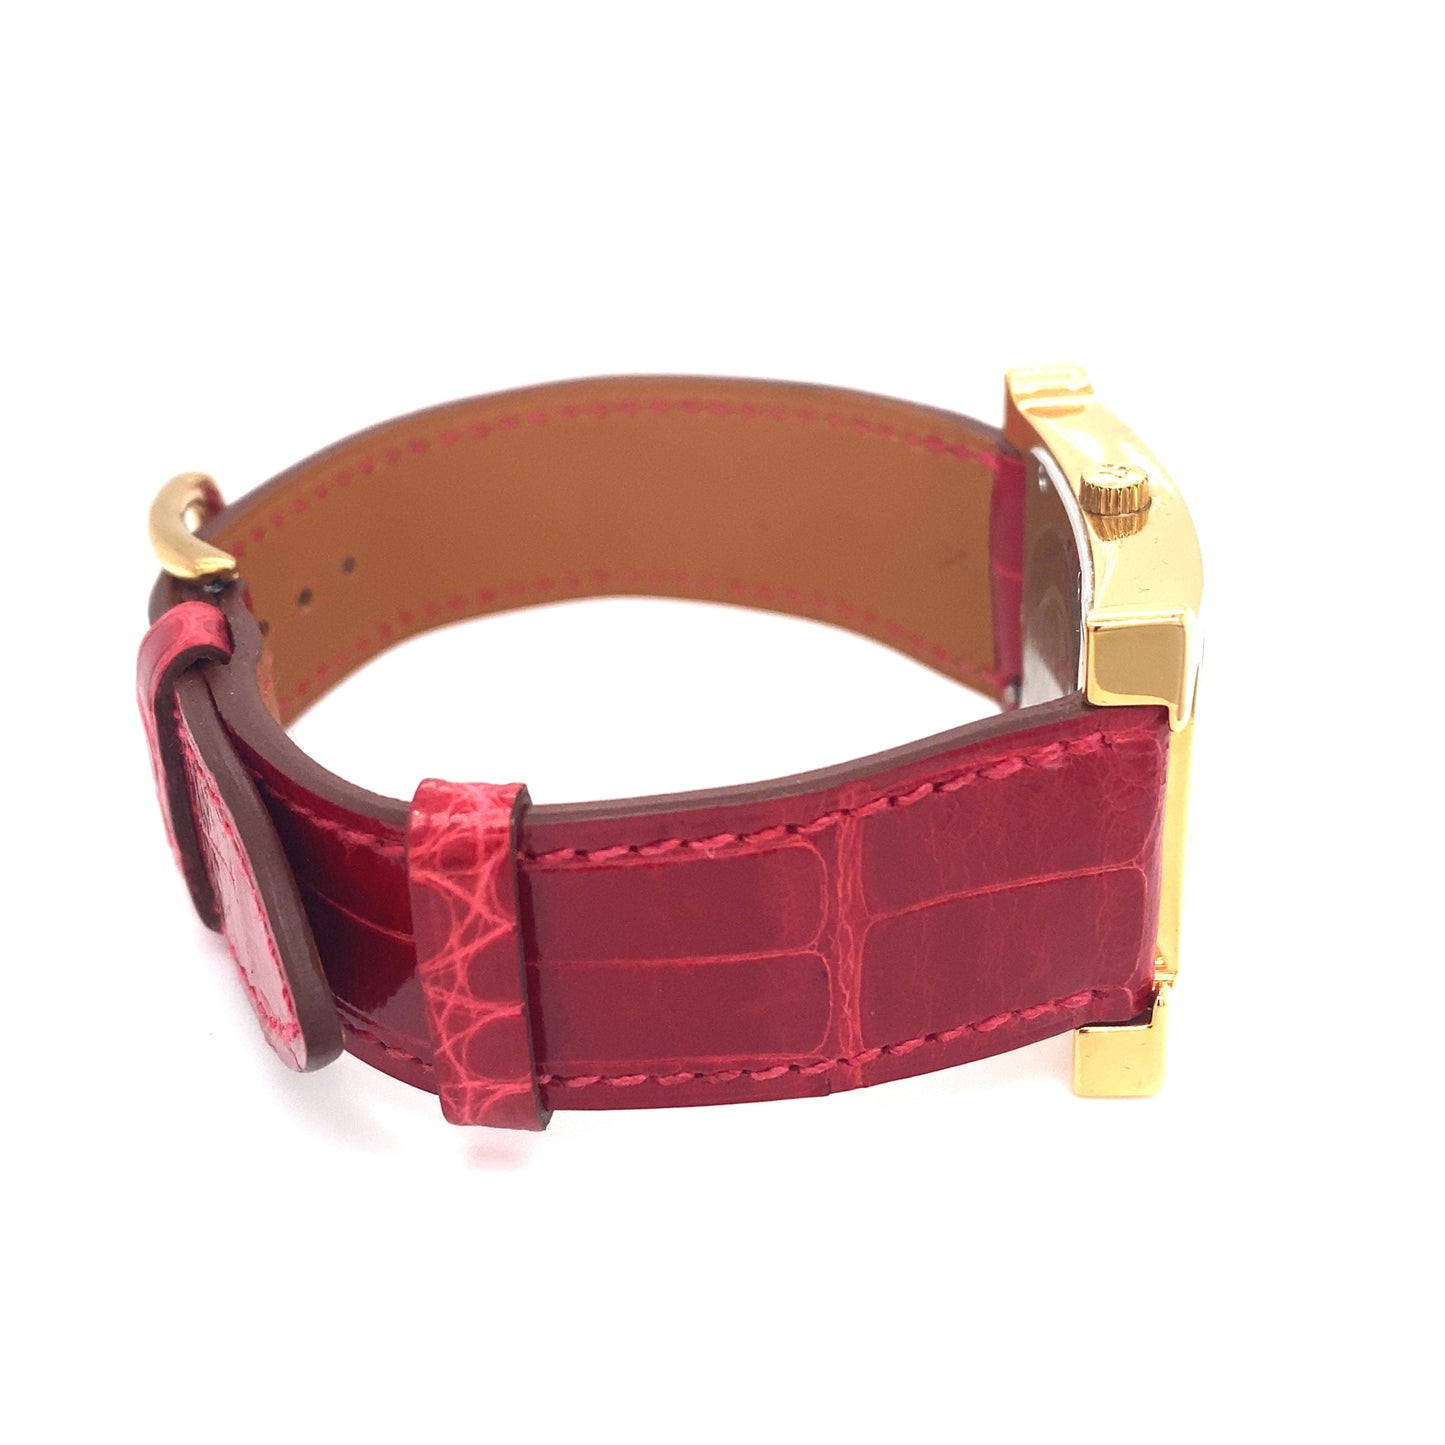 Hermès Heure Womens' Gold Tone Wrist Watch with Red Leather Band